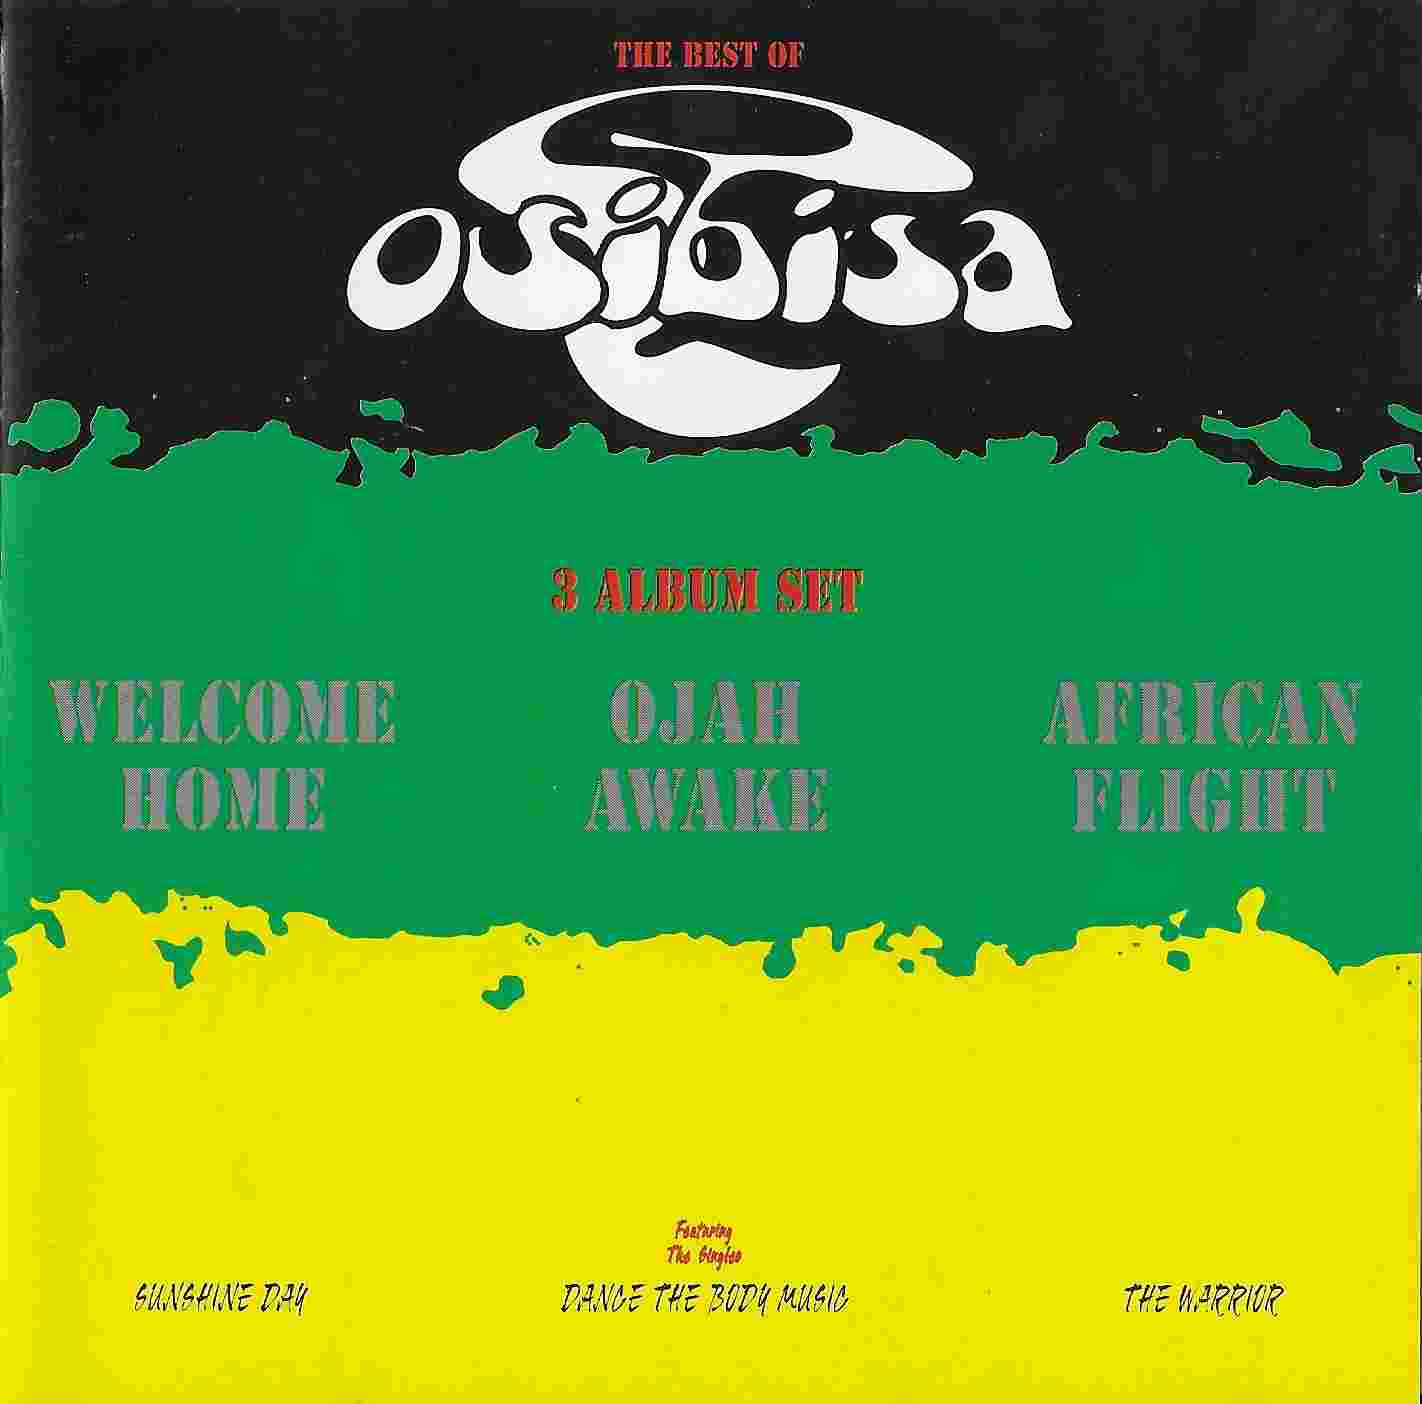 Picture of The best of Osibisa by artist Osibisa from the BBC cds - Records and Tapes library